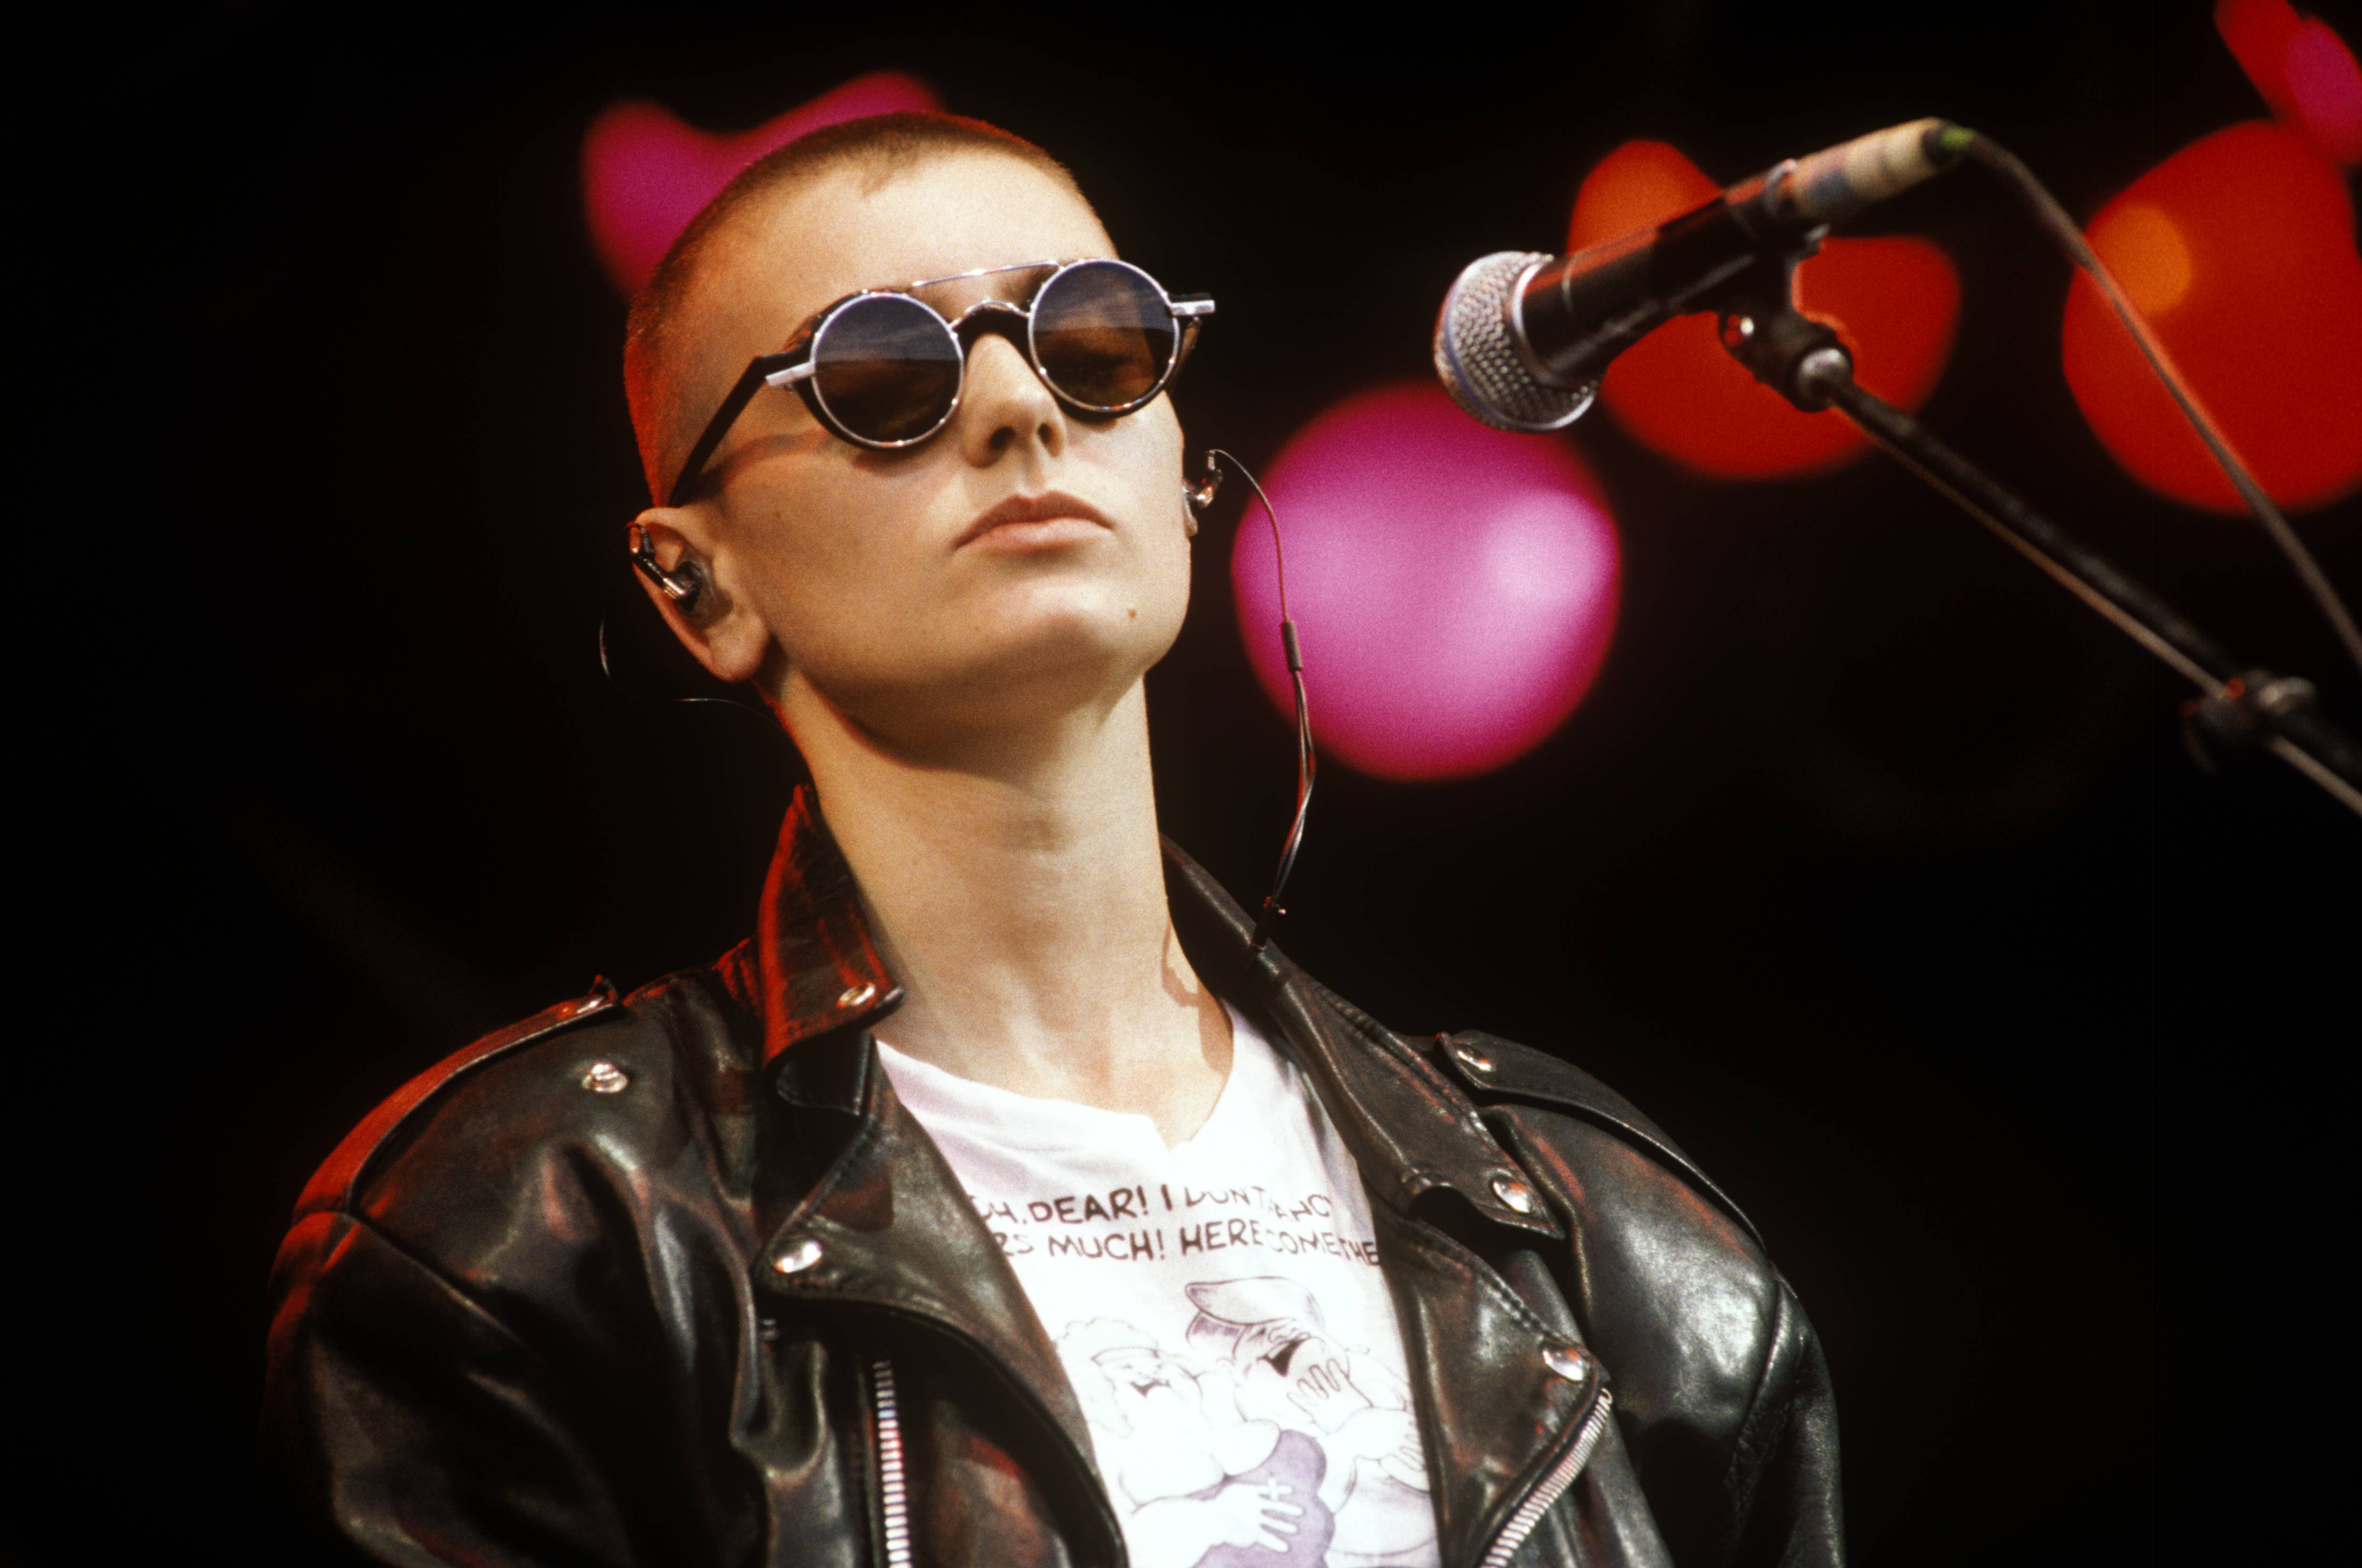 Sinéad O’Connor: <i></noscript>
<p> </p>
<p><strong>As you can see from some of the newly-published photos in her memoir </strong><i><span style=